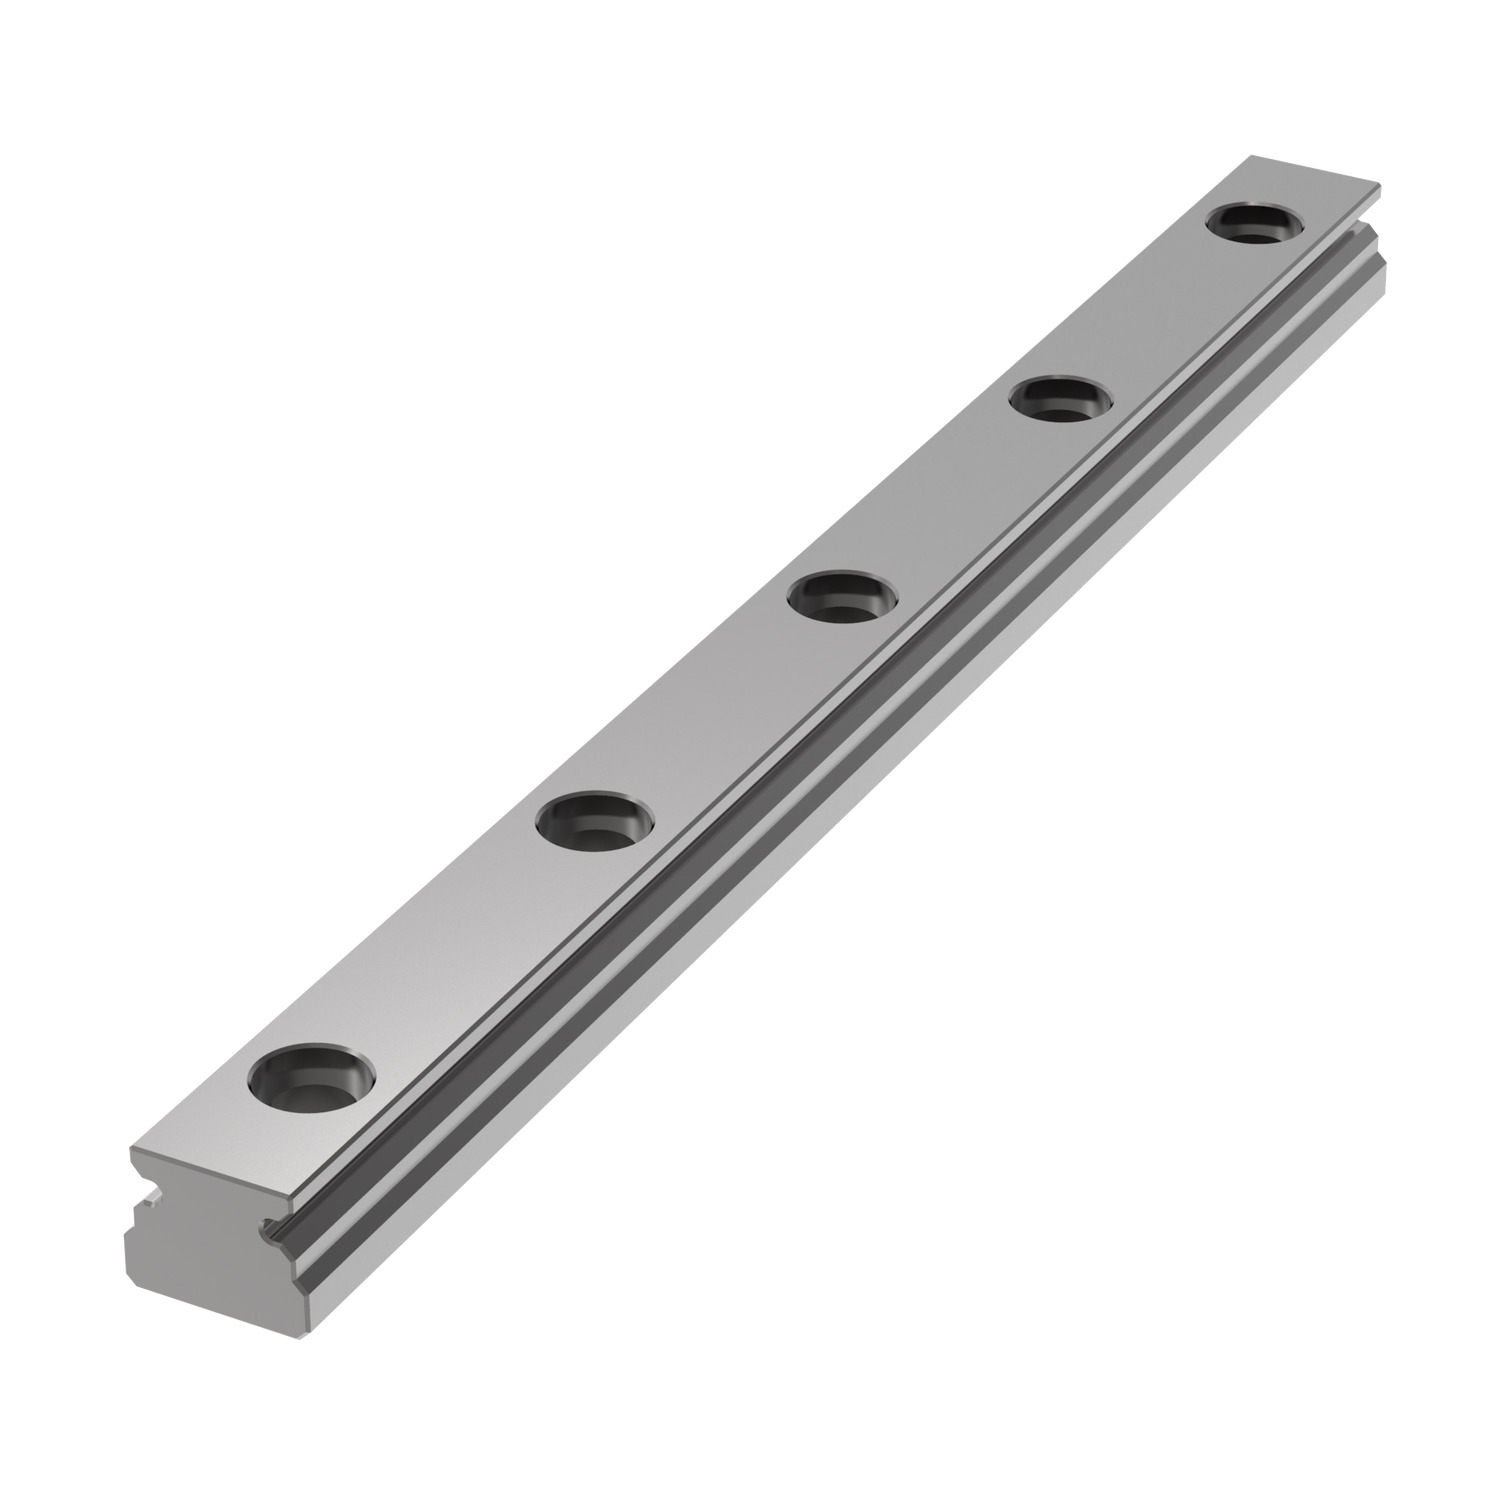 3mm Miniature Linear Rail Our range of miniature stainless steel linear guides could also offer a weight saving as compared to standard linear guides. See our miniature linear rails page for more information.